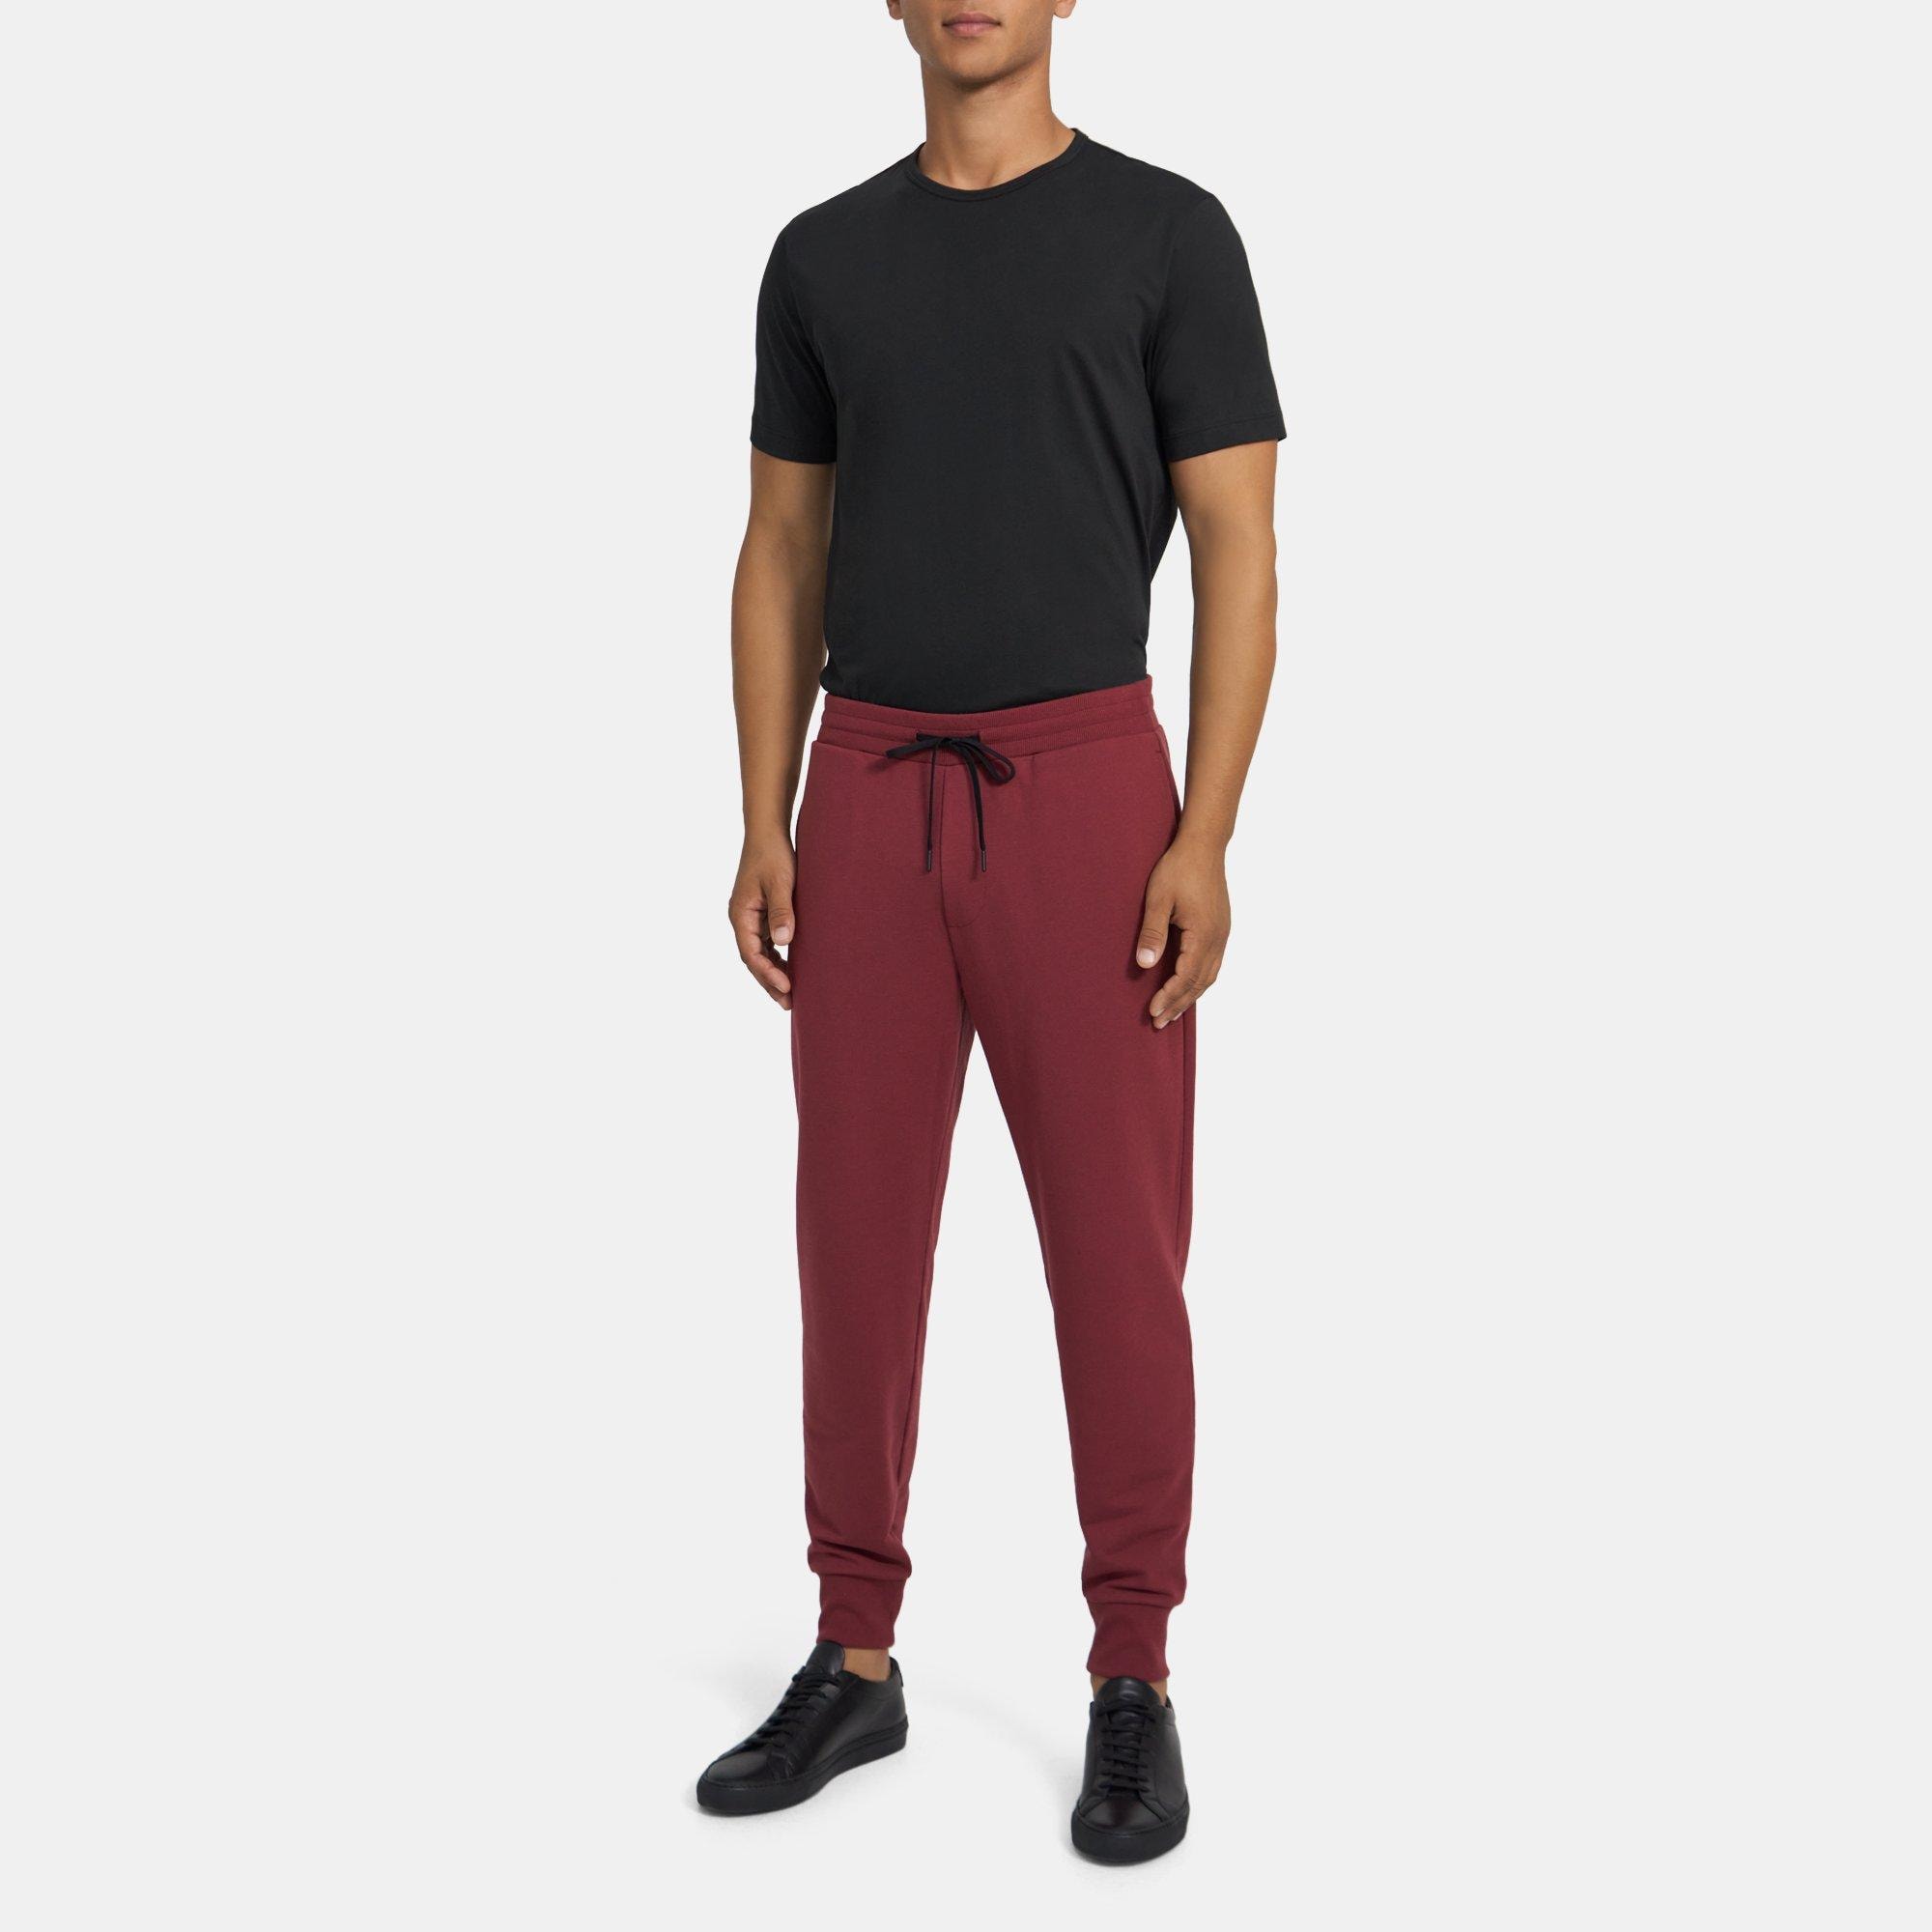 Theory Essential Sweatpant in Cloud Fleece